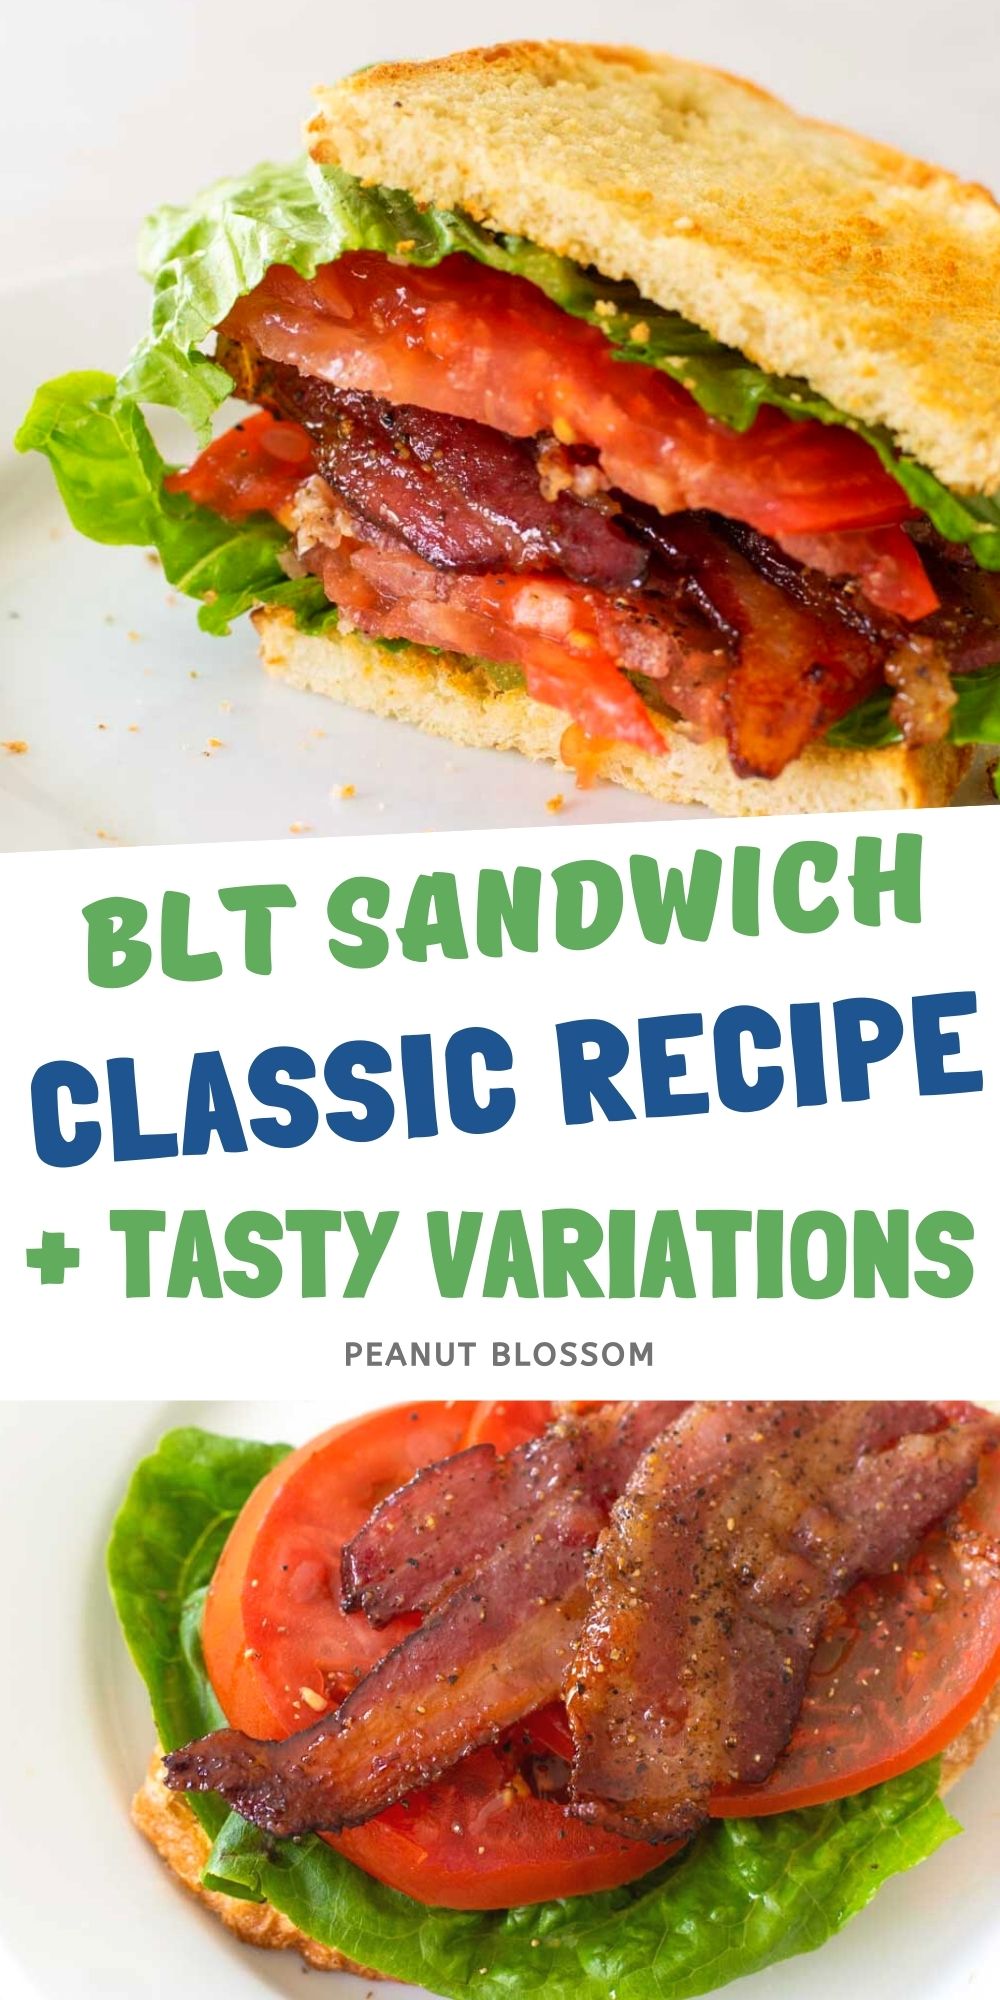 A photo collage shows a classic BLT sandwich next to an open faced sandwich with the ingredients on top.